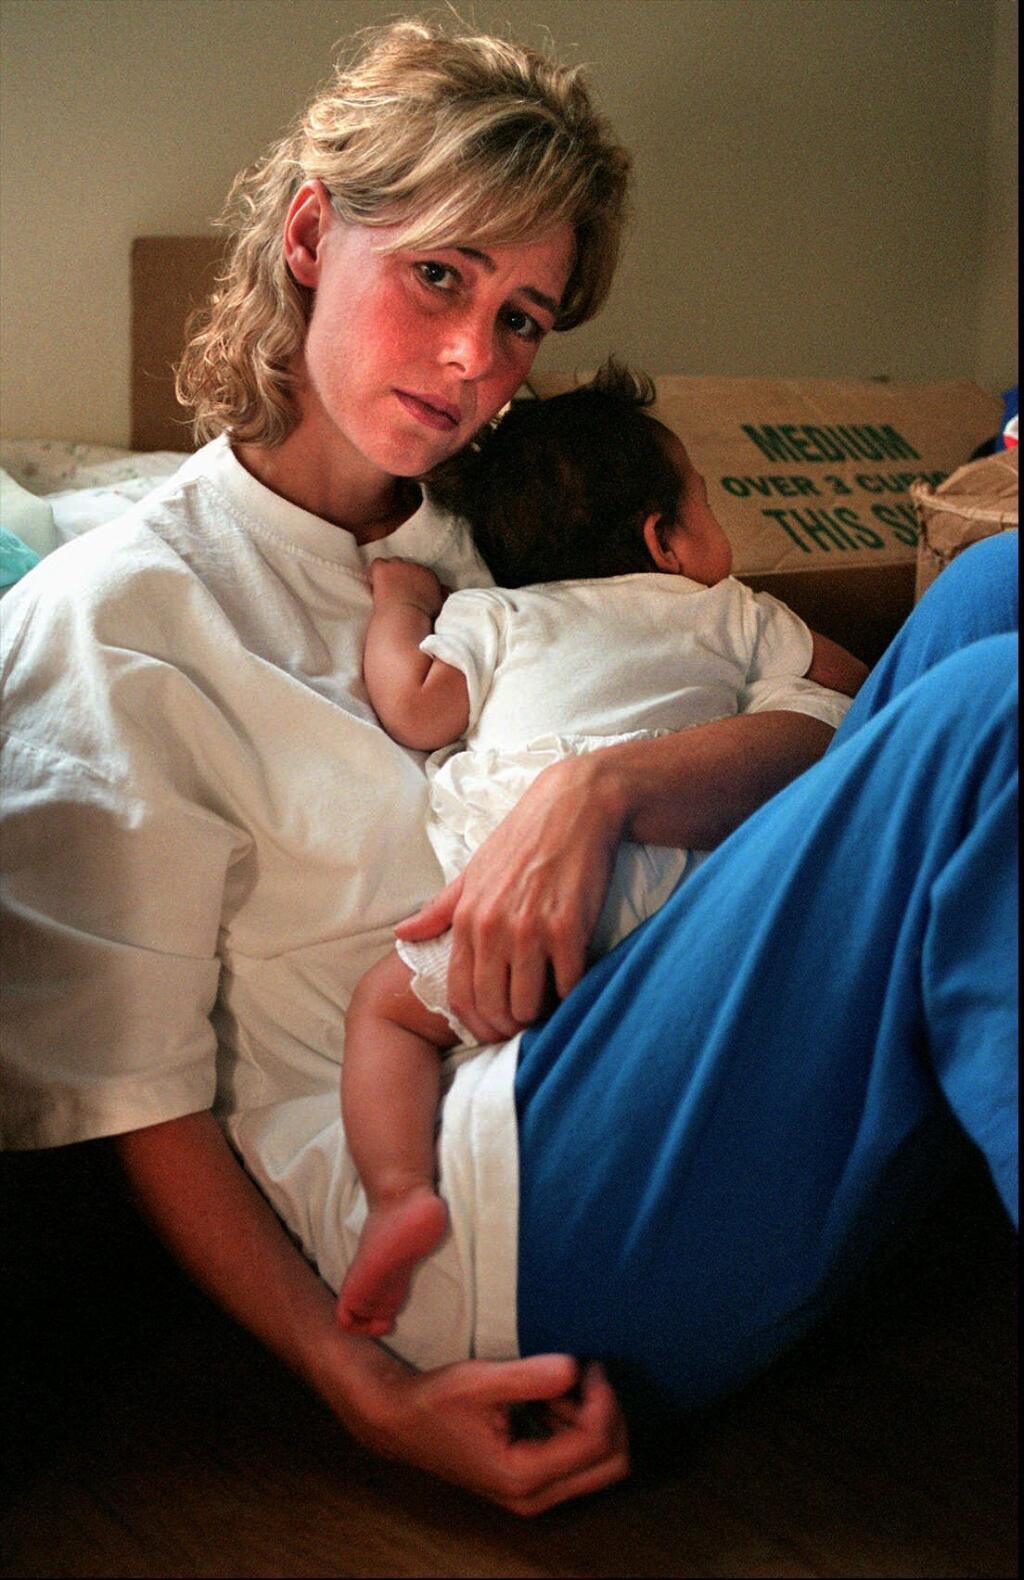 FILE - In this July 20, 1997, file photo, Mary Kay Letourneau holds the baby, in Normandy Park, Wash., that was fathered by a boy she once taught as an elementary school teacher. Letourneau, who married her former sixth-grade student after she was convicted for raping him, has died. She was 58. Her lawyer David Gehrke told news outlets Letourneau died Tuesday, July 7, 2020, of cancer. The former suburban Seattle teacher was arrested in 1997 after she became pregnant with Vili Fualaau's child. She later pleaded guilty to second-degree child rape. (Betty Udesen/The Seattle Times via AP, File)